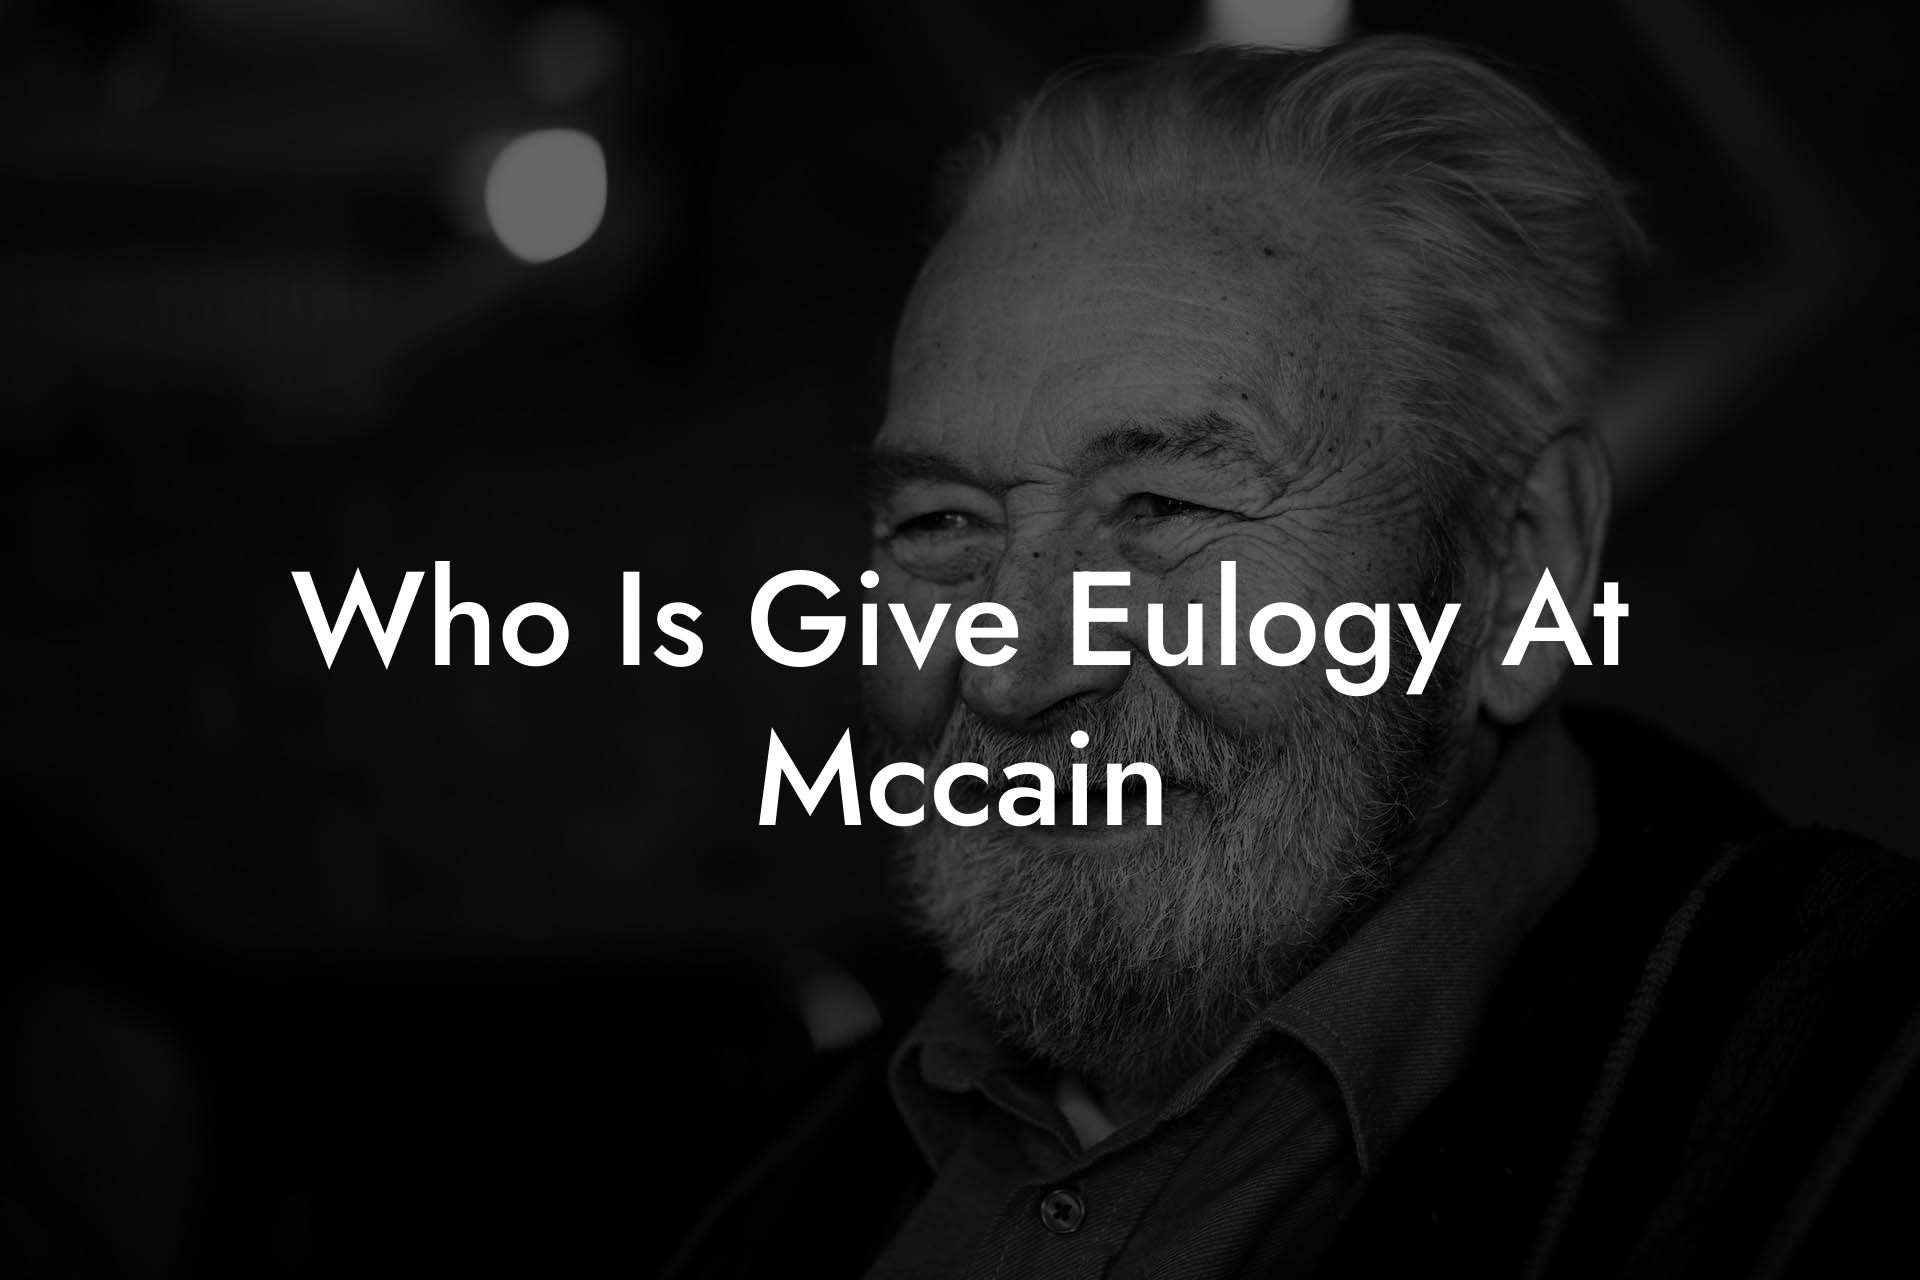 Who Is Give Eulogy At Mccain